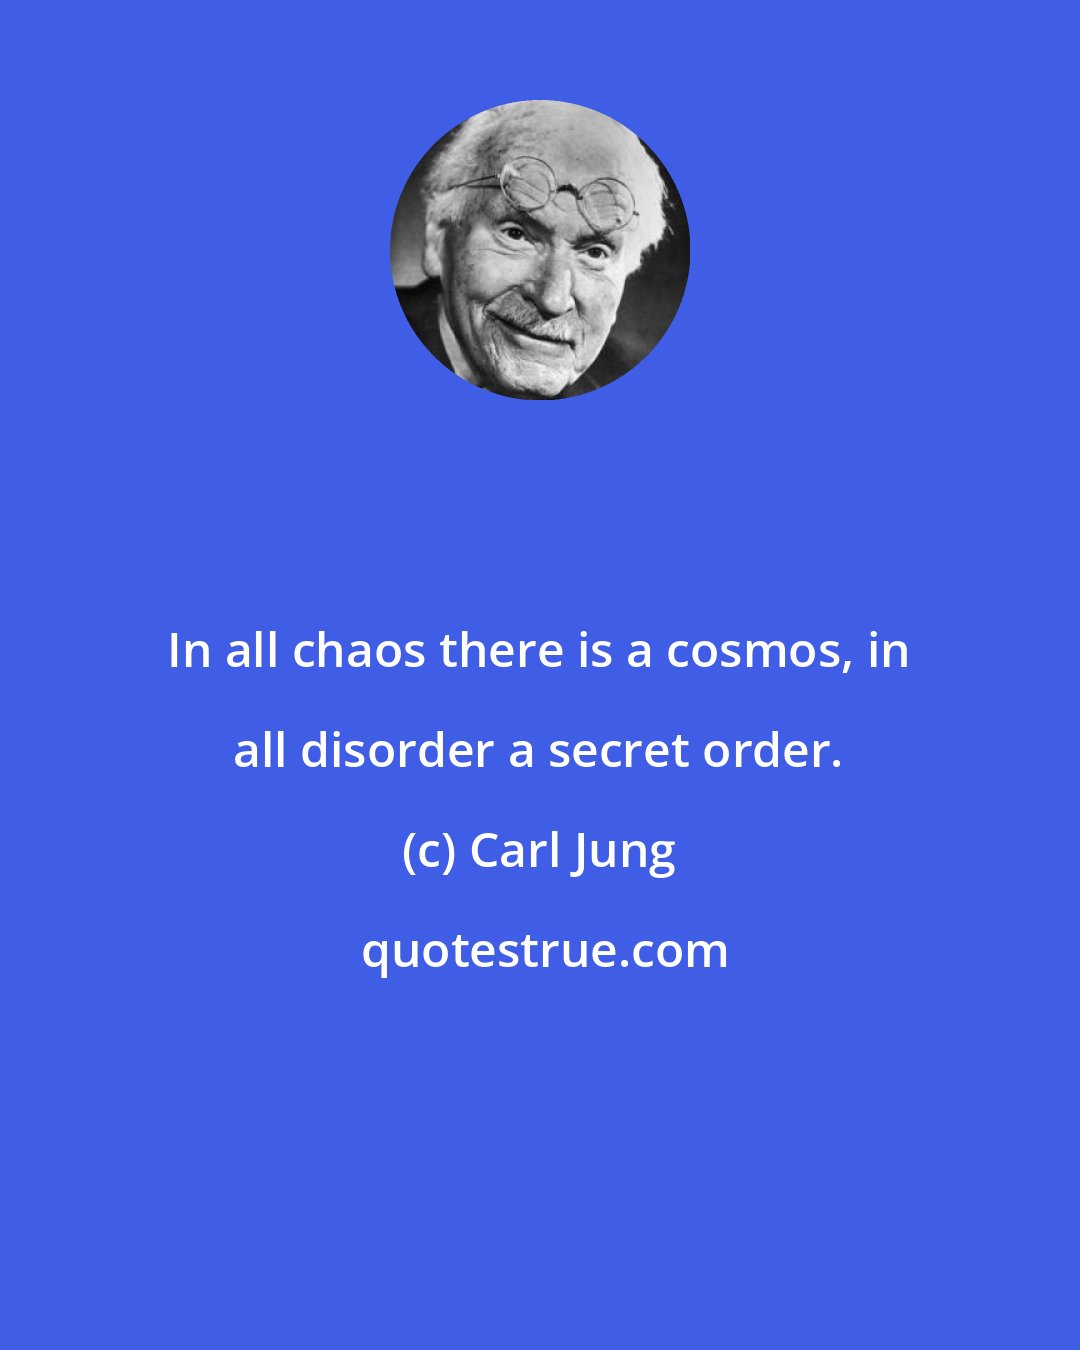 Carl Jung: In all chaos there is a cosmos, in all disorder a secret order.